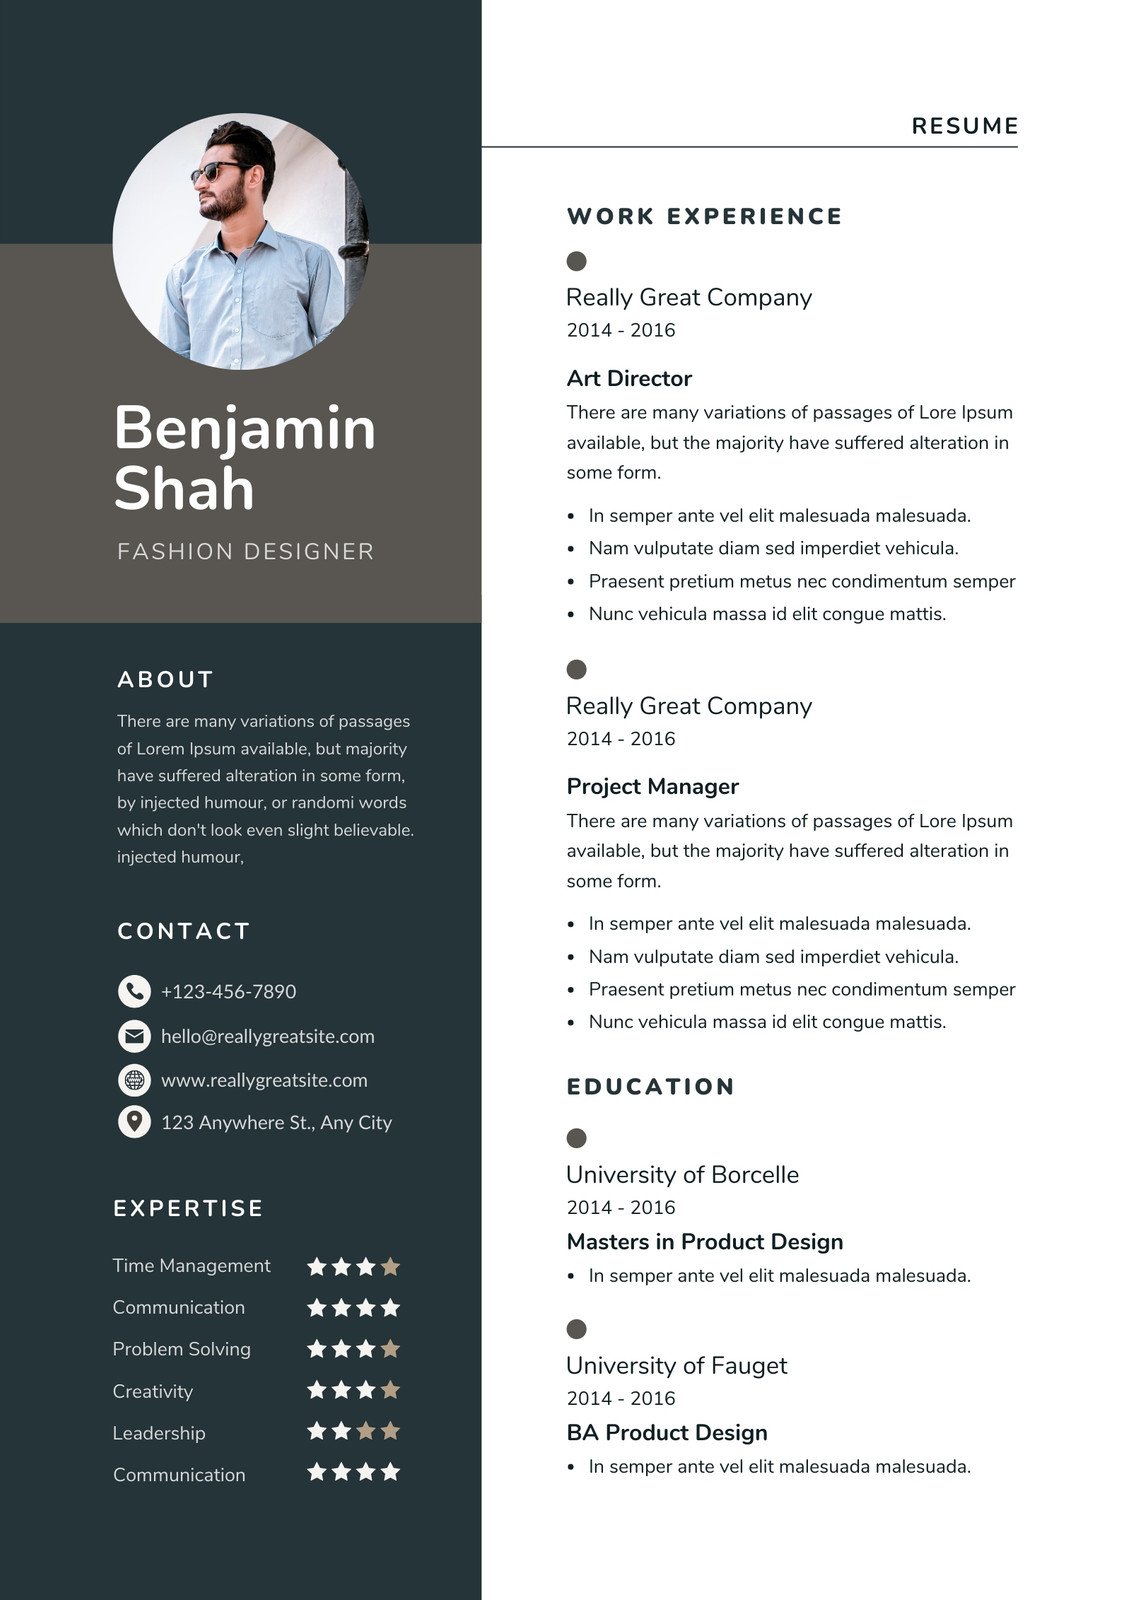 Resume canva All about